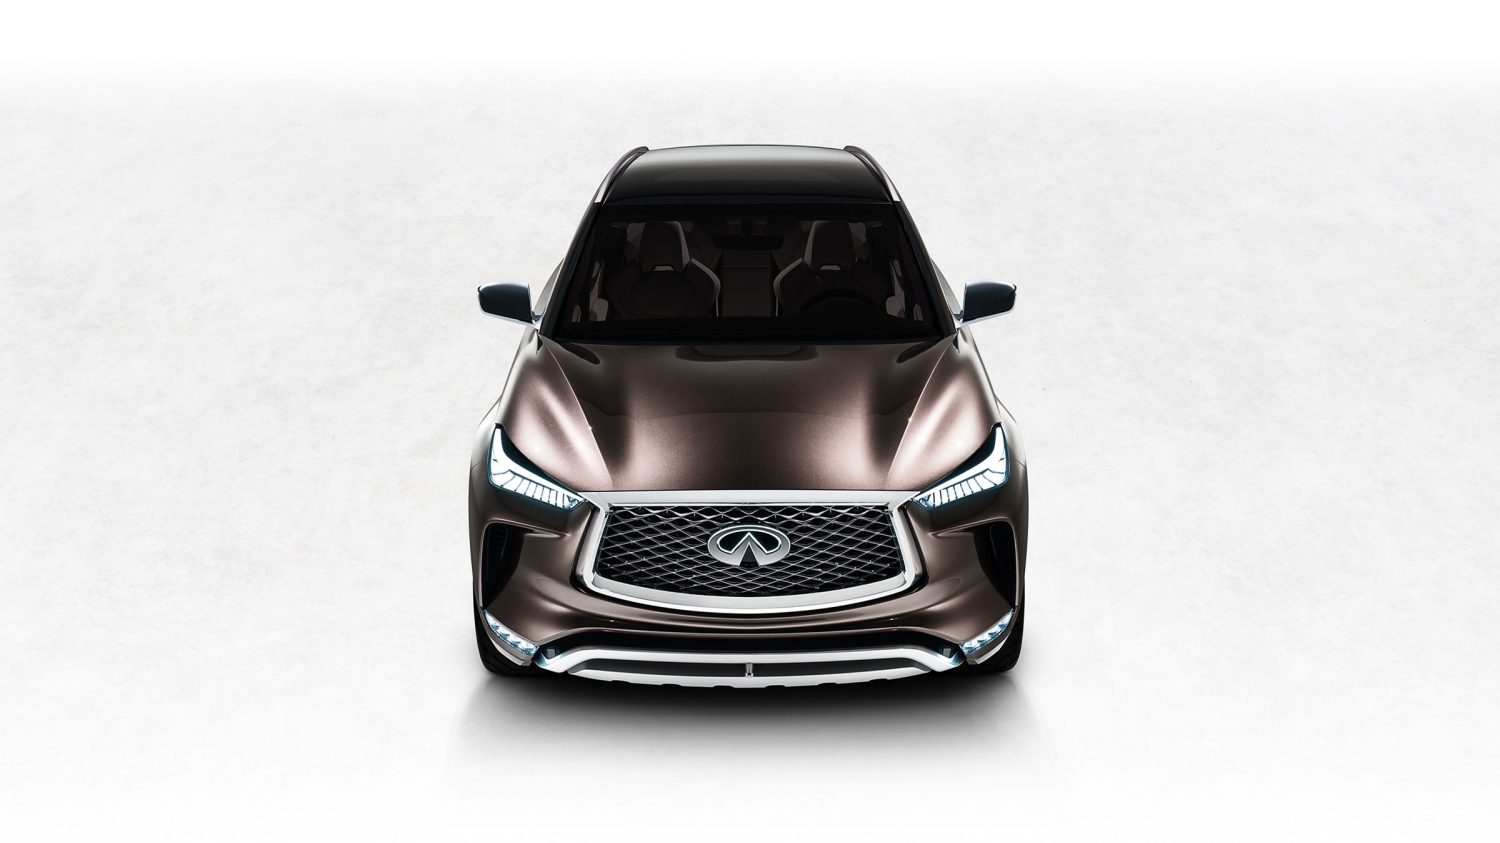 Aerial view of the INFINITI QX50 Concept